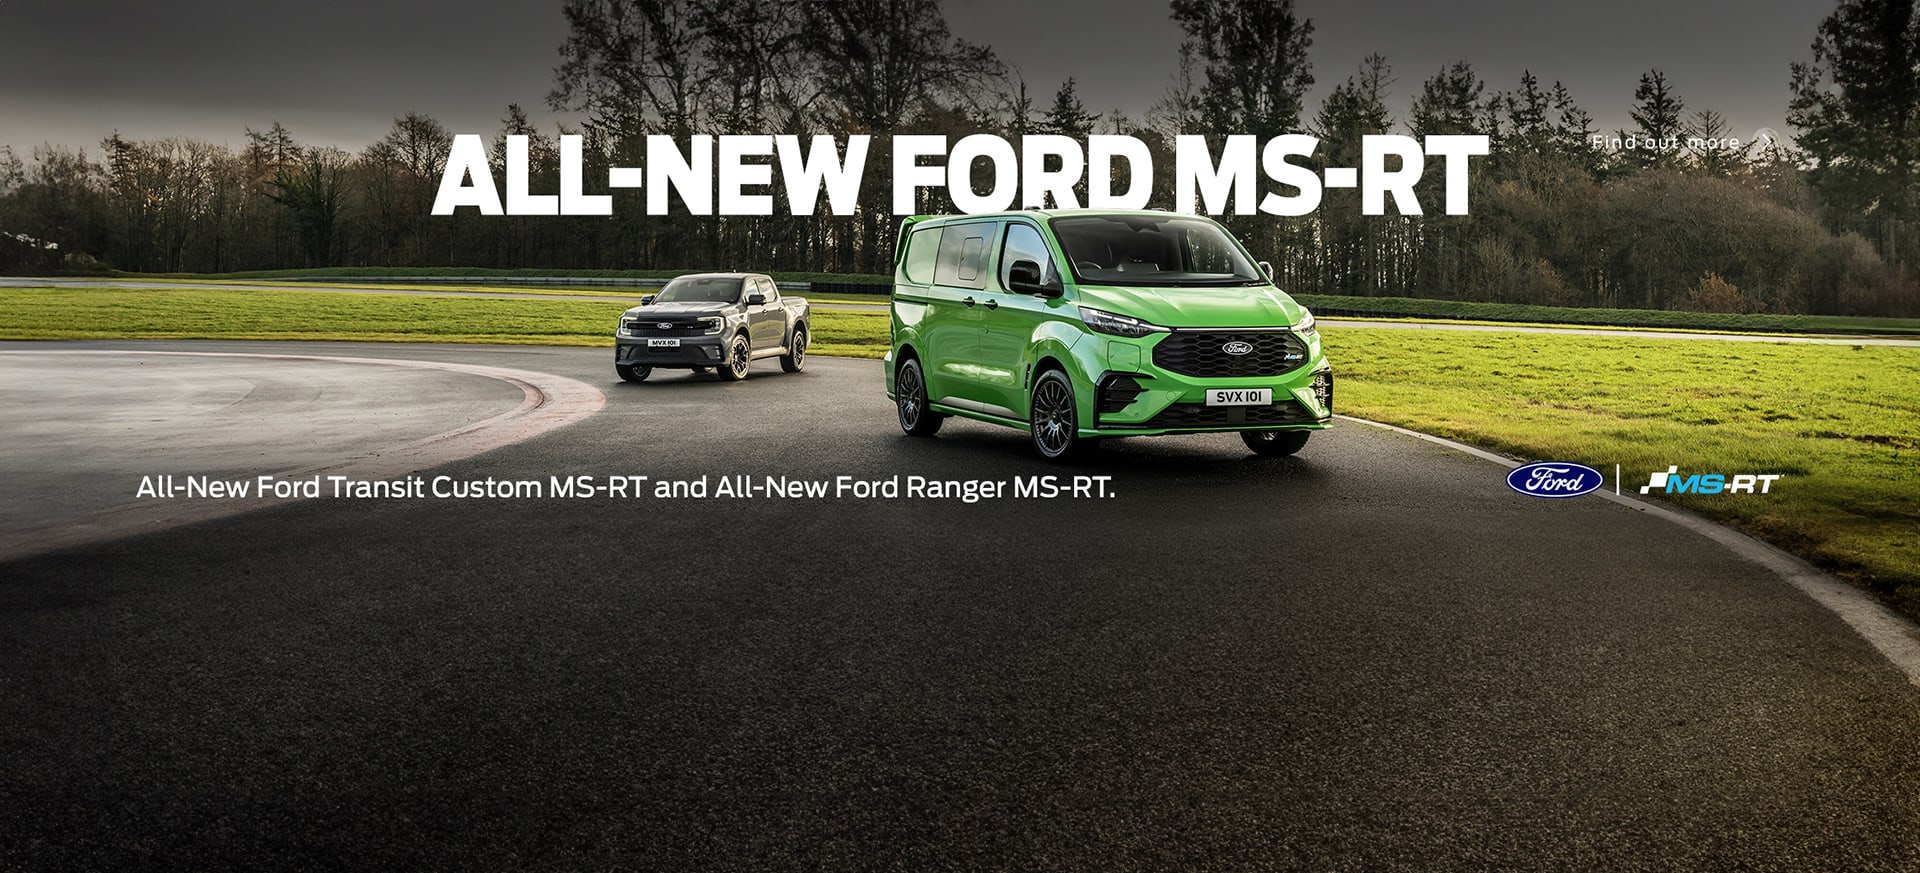 The Ford MS-RT Range